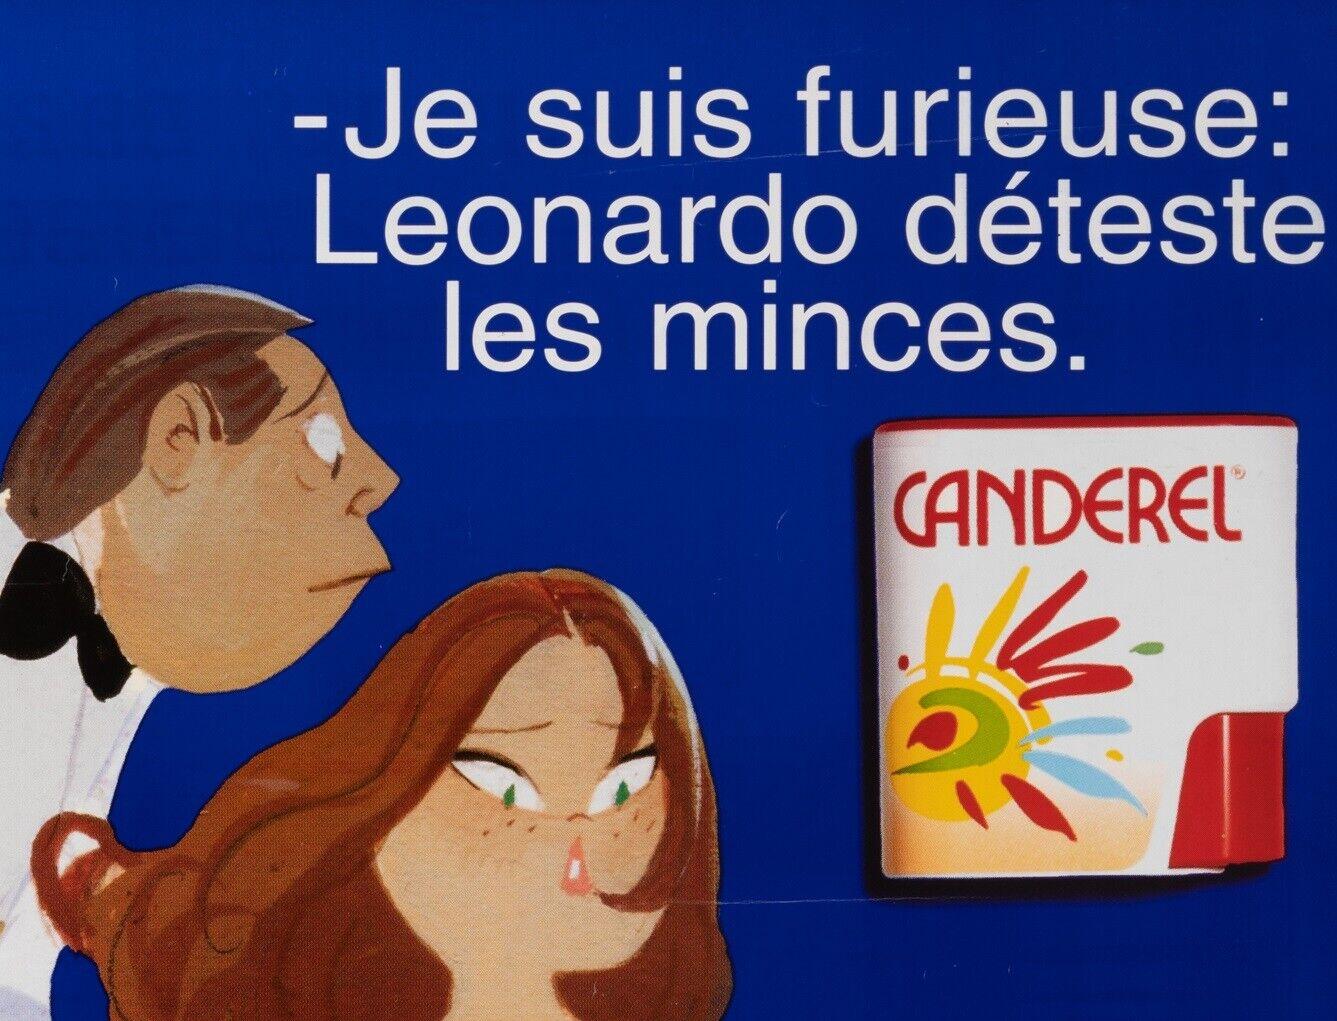 Original Poster-Edmond Kiraz-Canderel-Léonardo-Parisiennes, c.1990

Poster advertisement for the Canderel brand, sees a reference to film Titanic, a woman and a sailor, as well as the phrase 